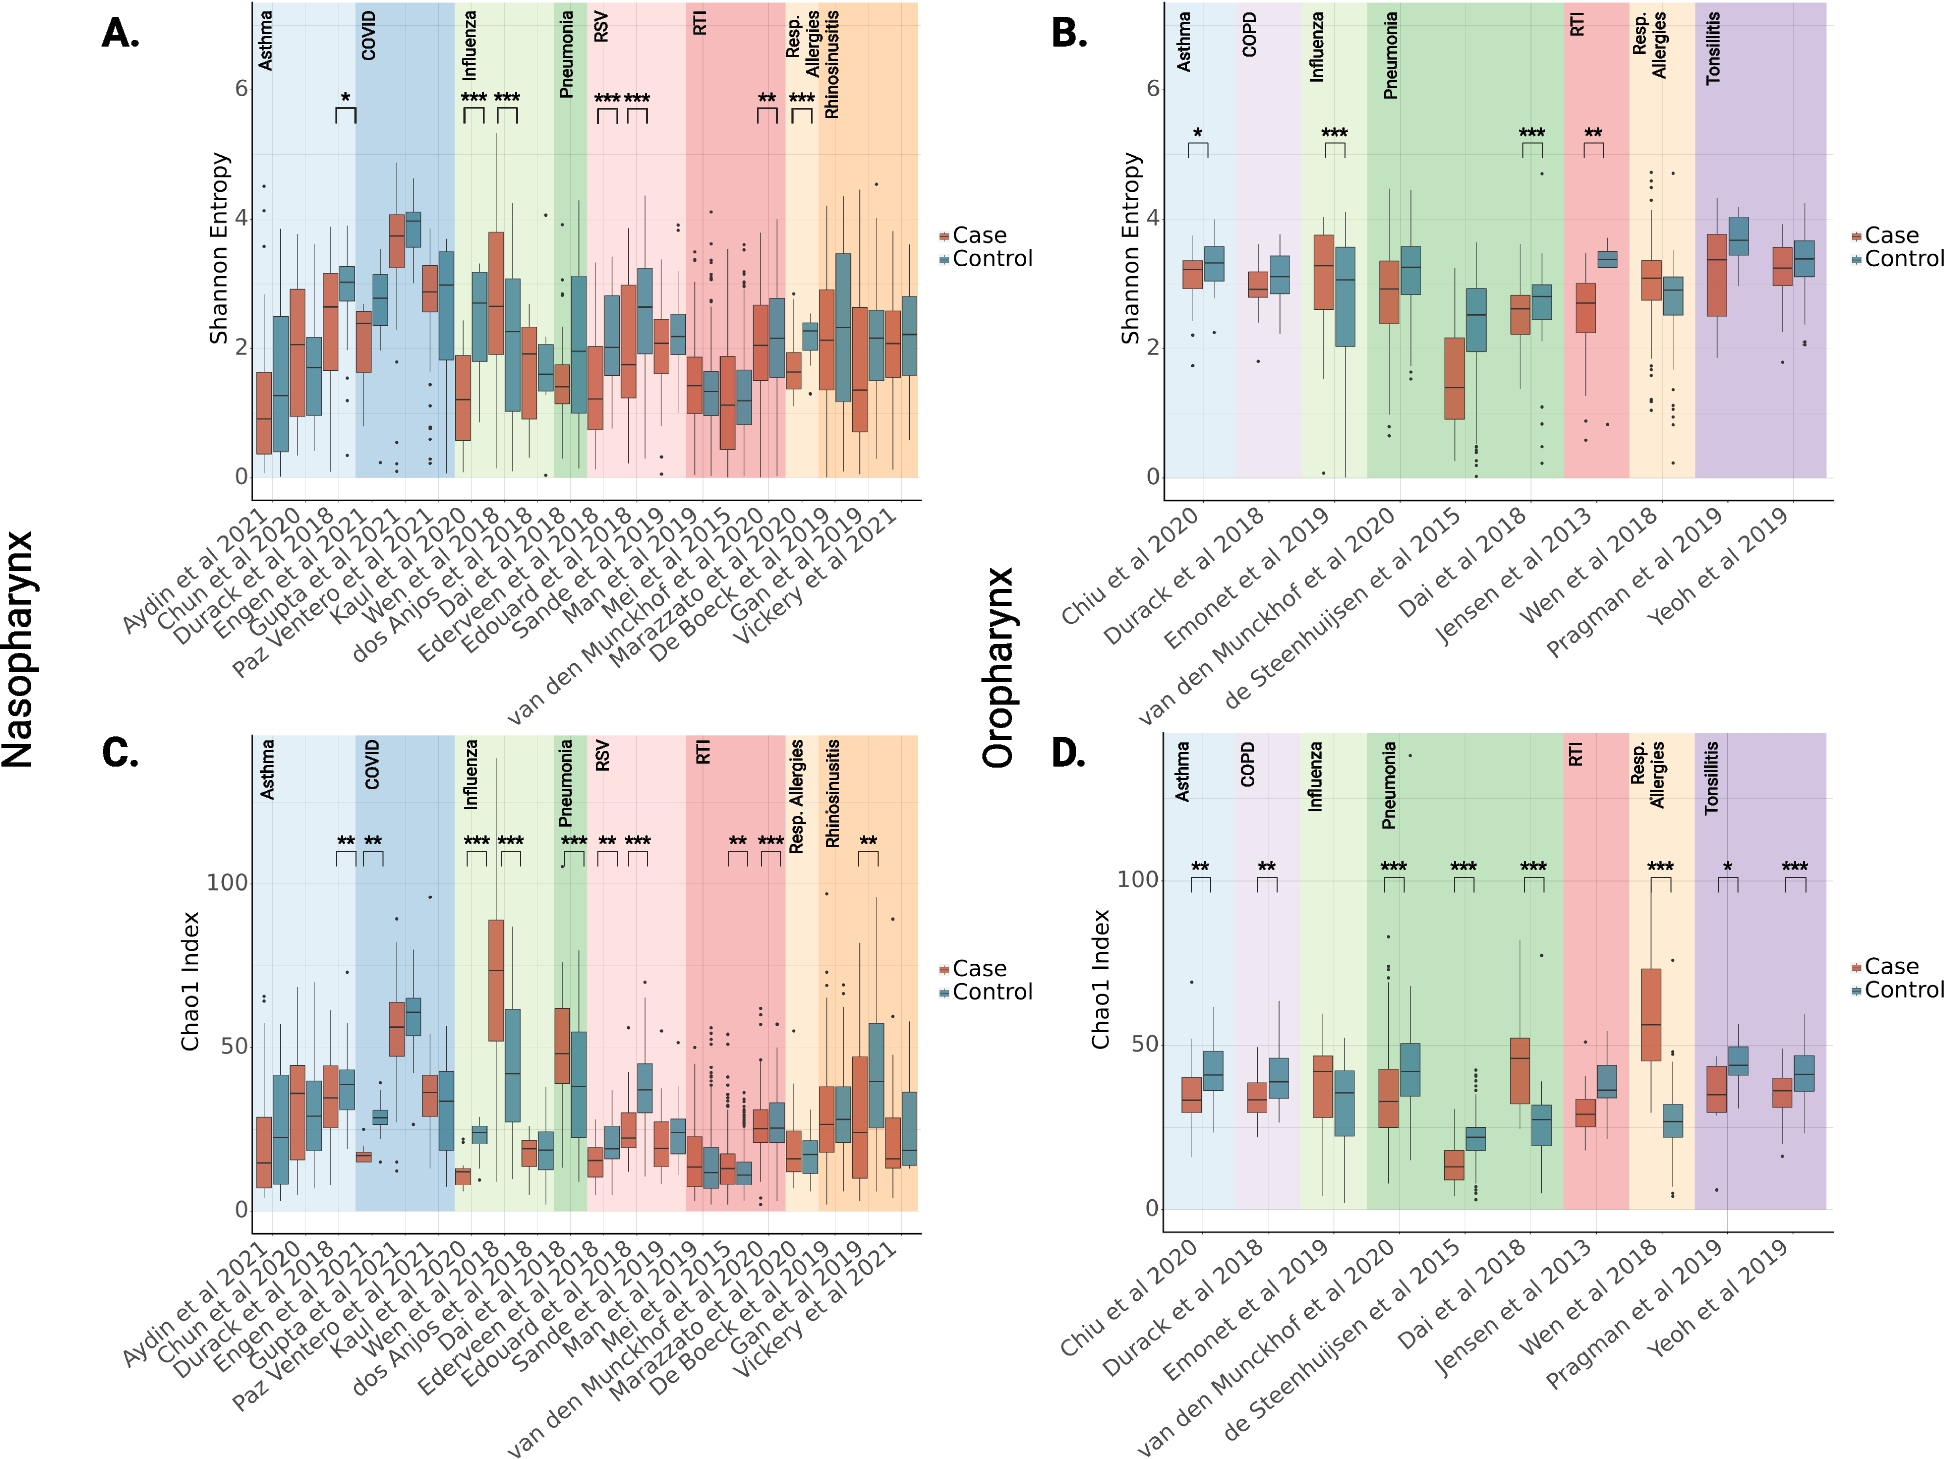 Meta-analysis of the human upper respiratory tract microbiome reveals robust taxonomic associations with health and disease